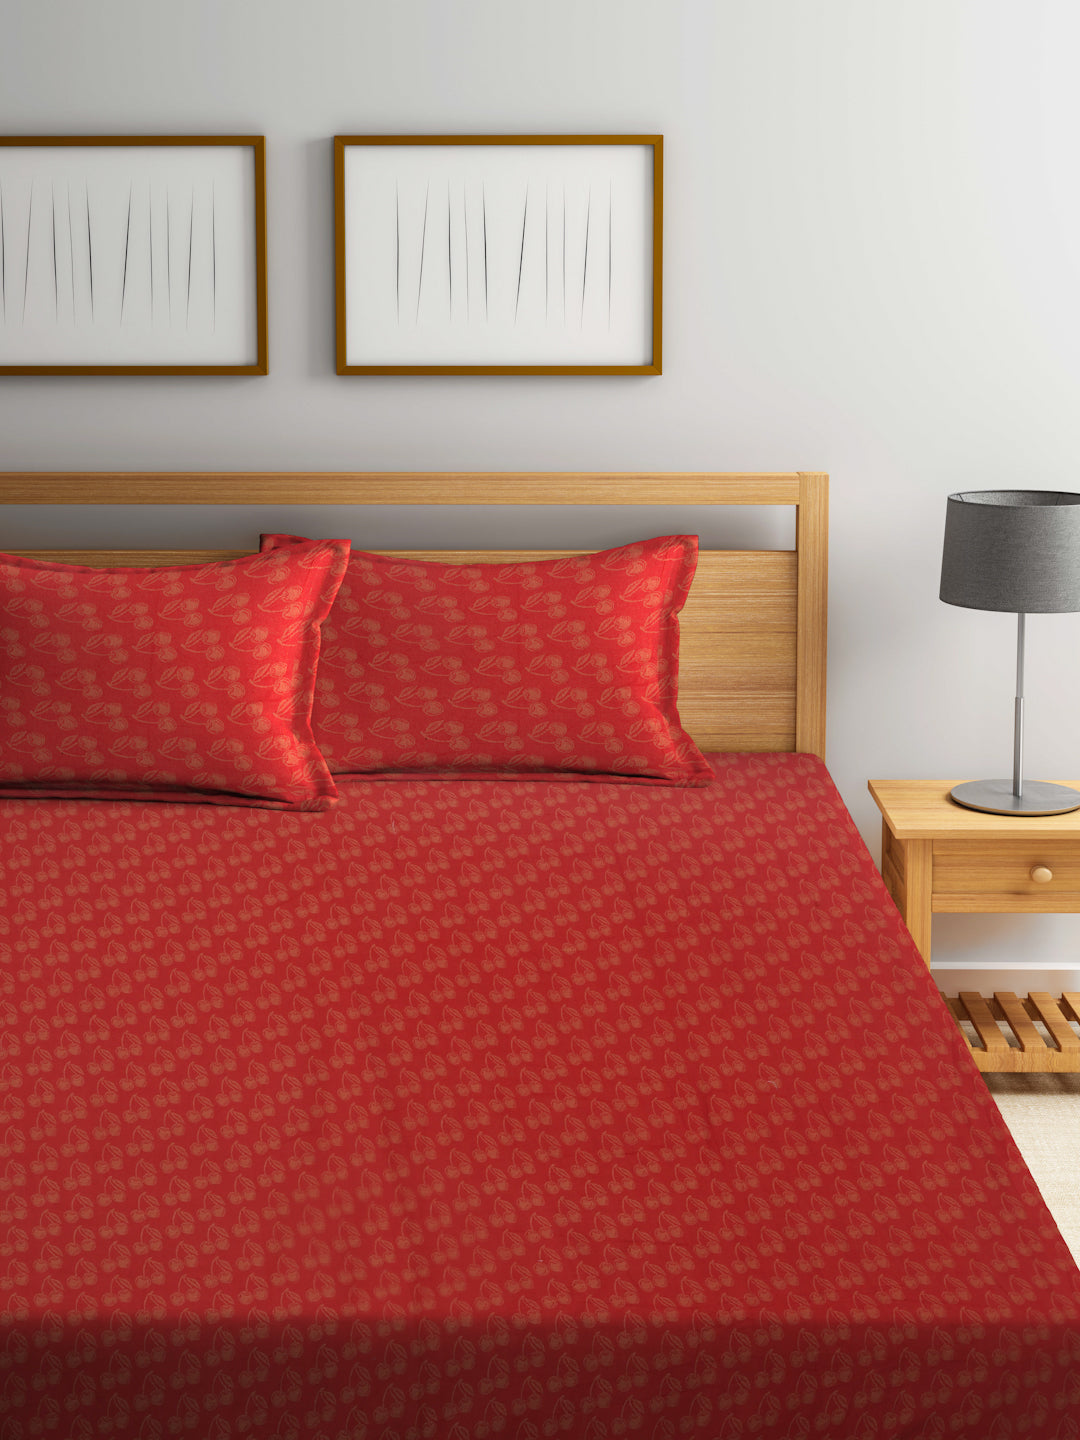 Arrabi Red Leaf Handwoven Cotton Super King Size Bedsheet with 2 Pillow Covers (270 X 270 cm)